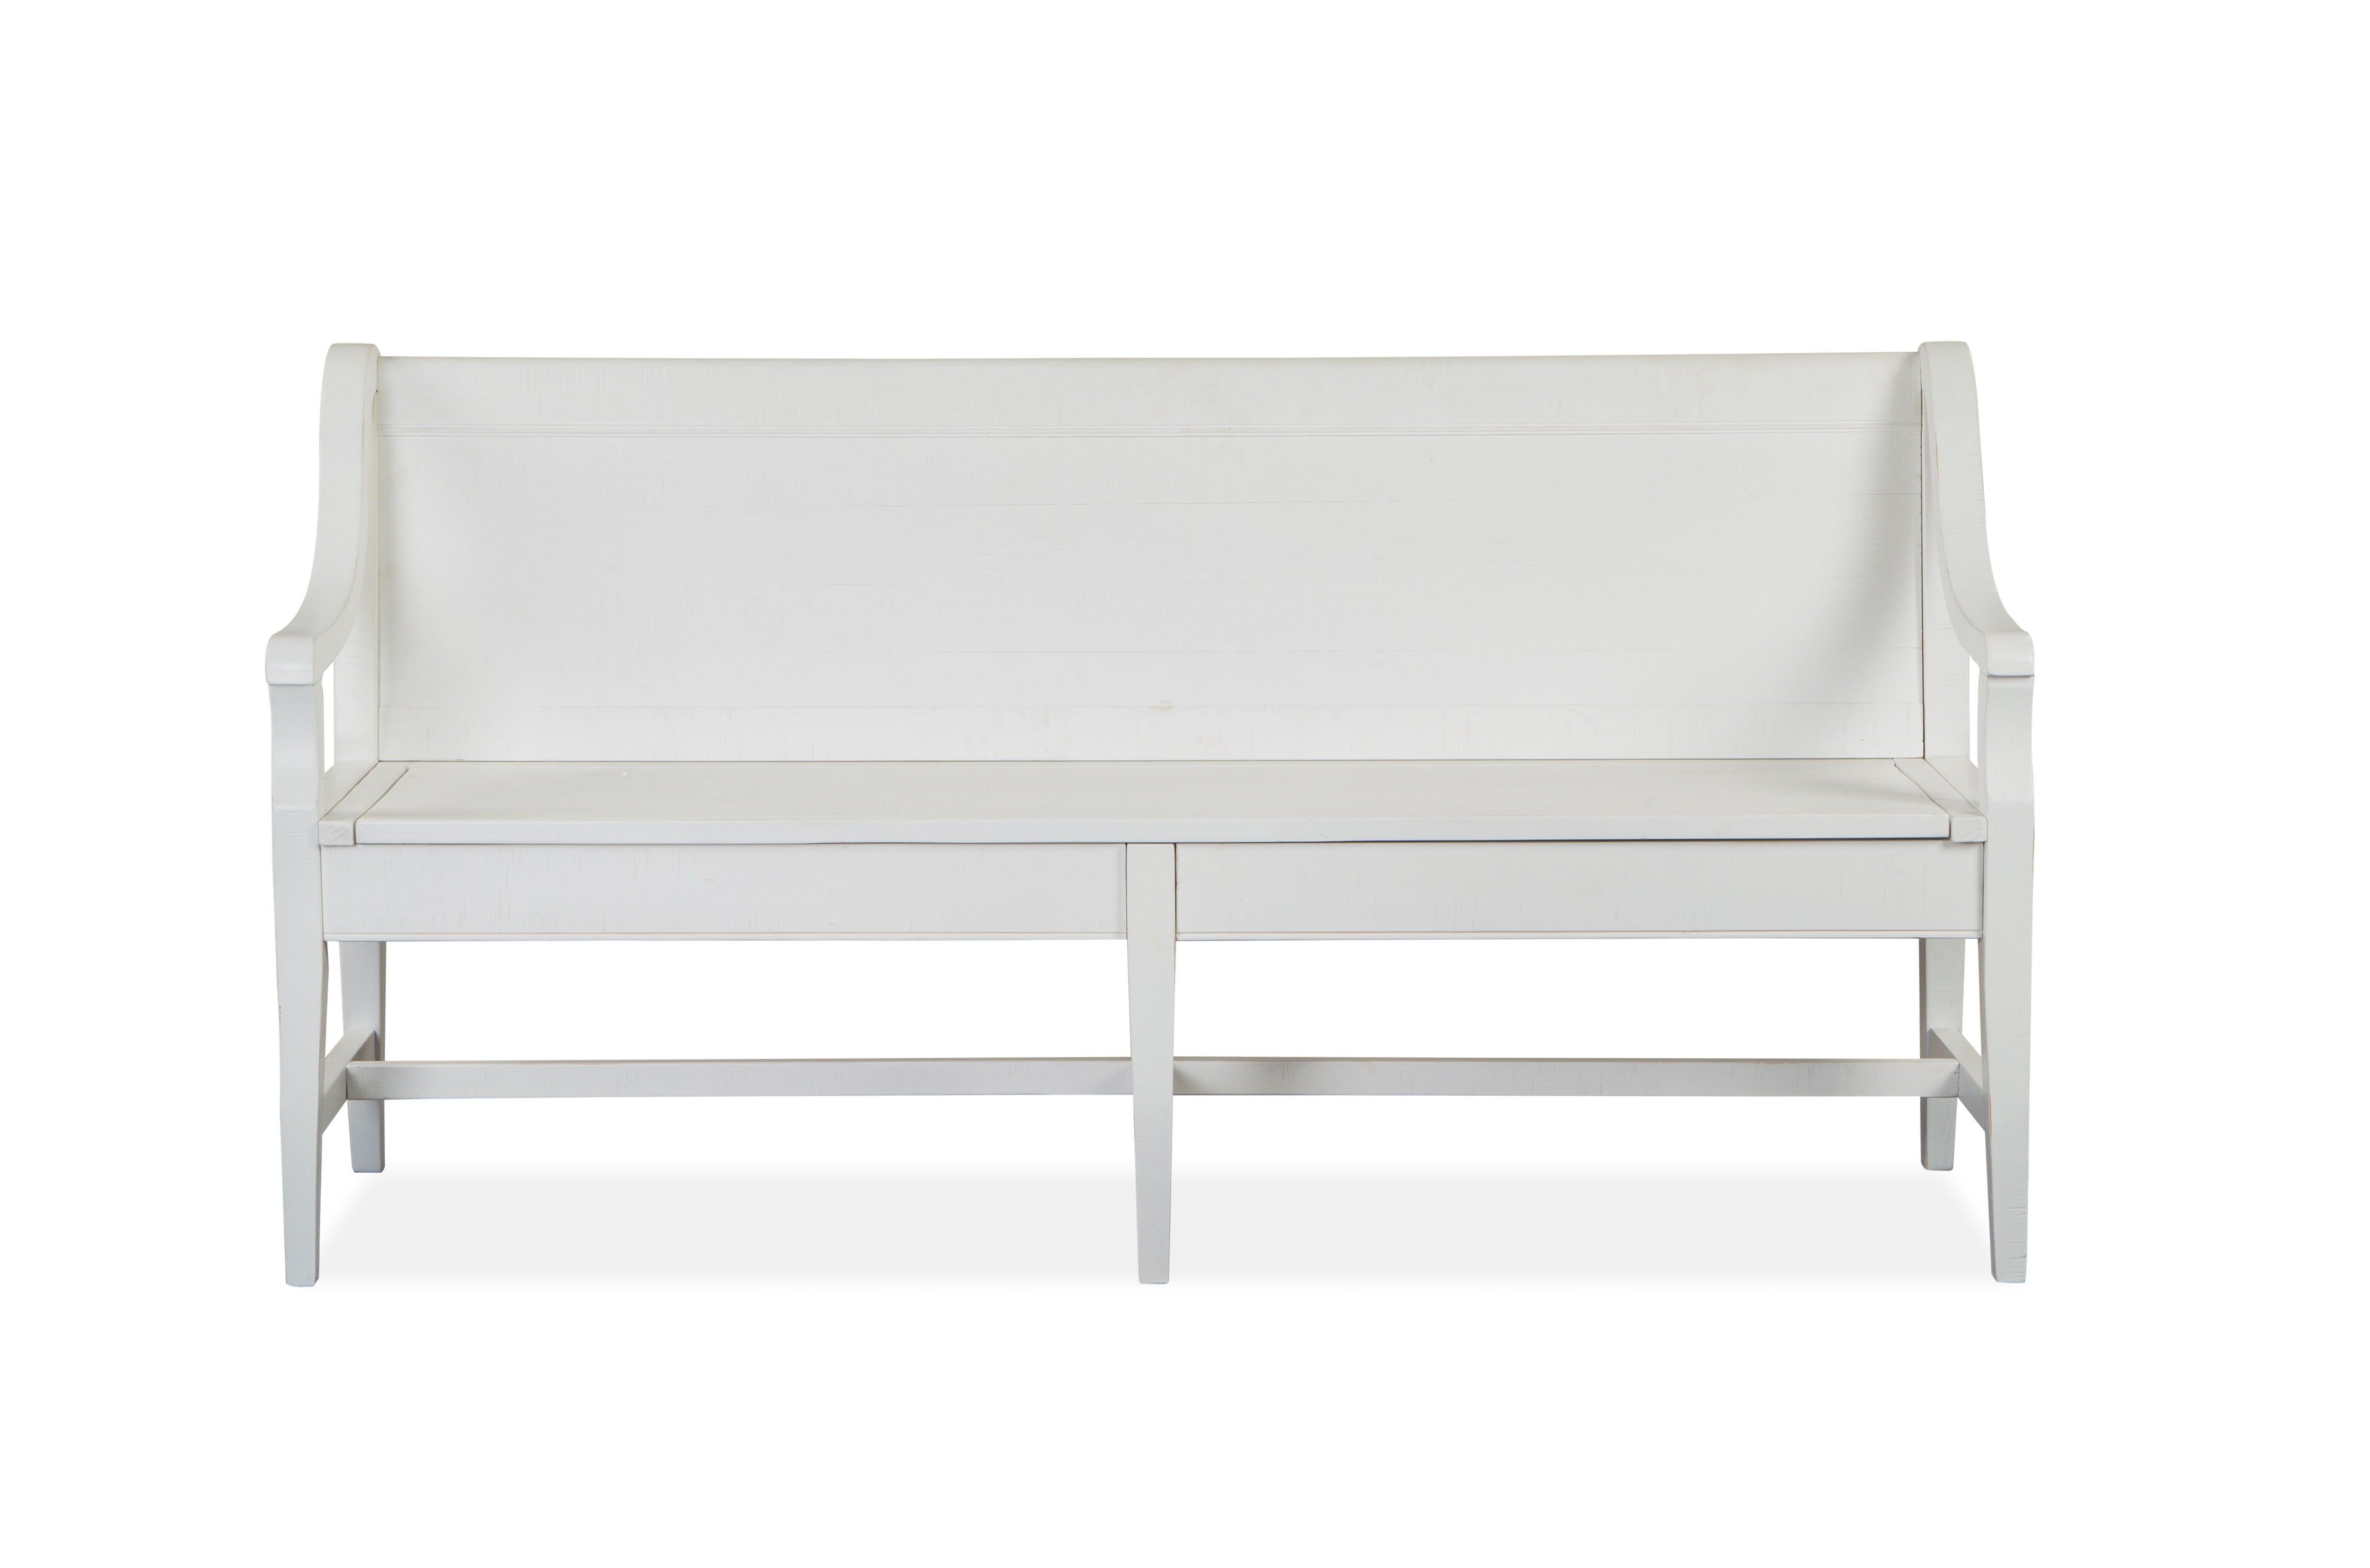 Magnussen Furniture - Heron Cove - Bench With Back - Chalk White - 5th Avenue Furniture